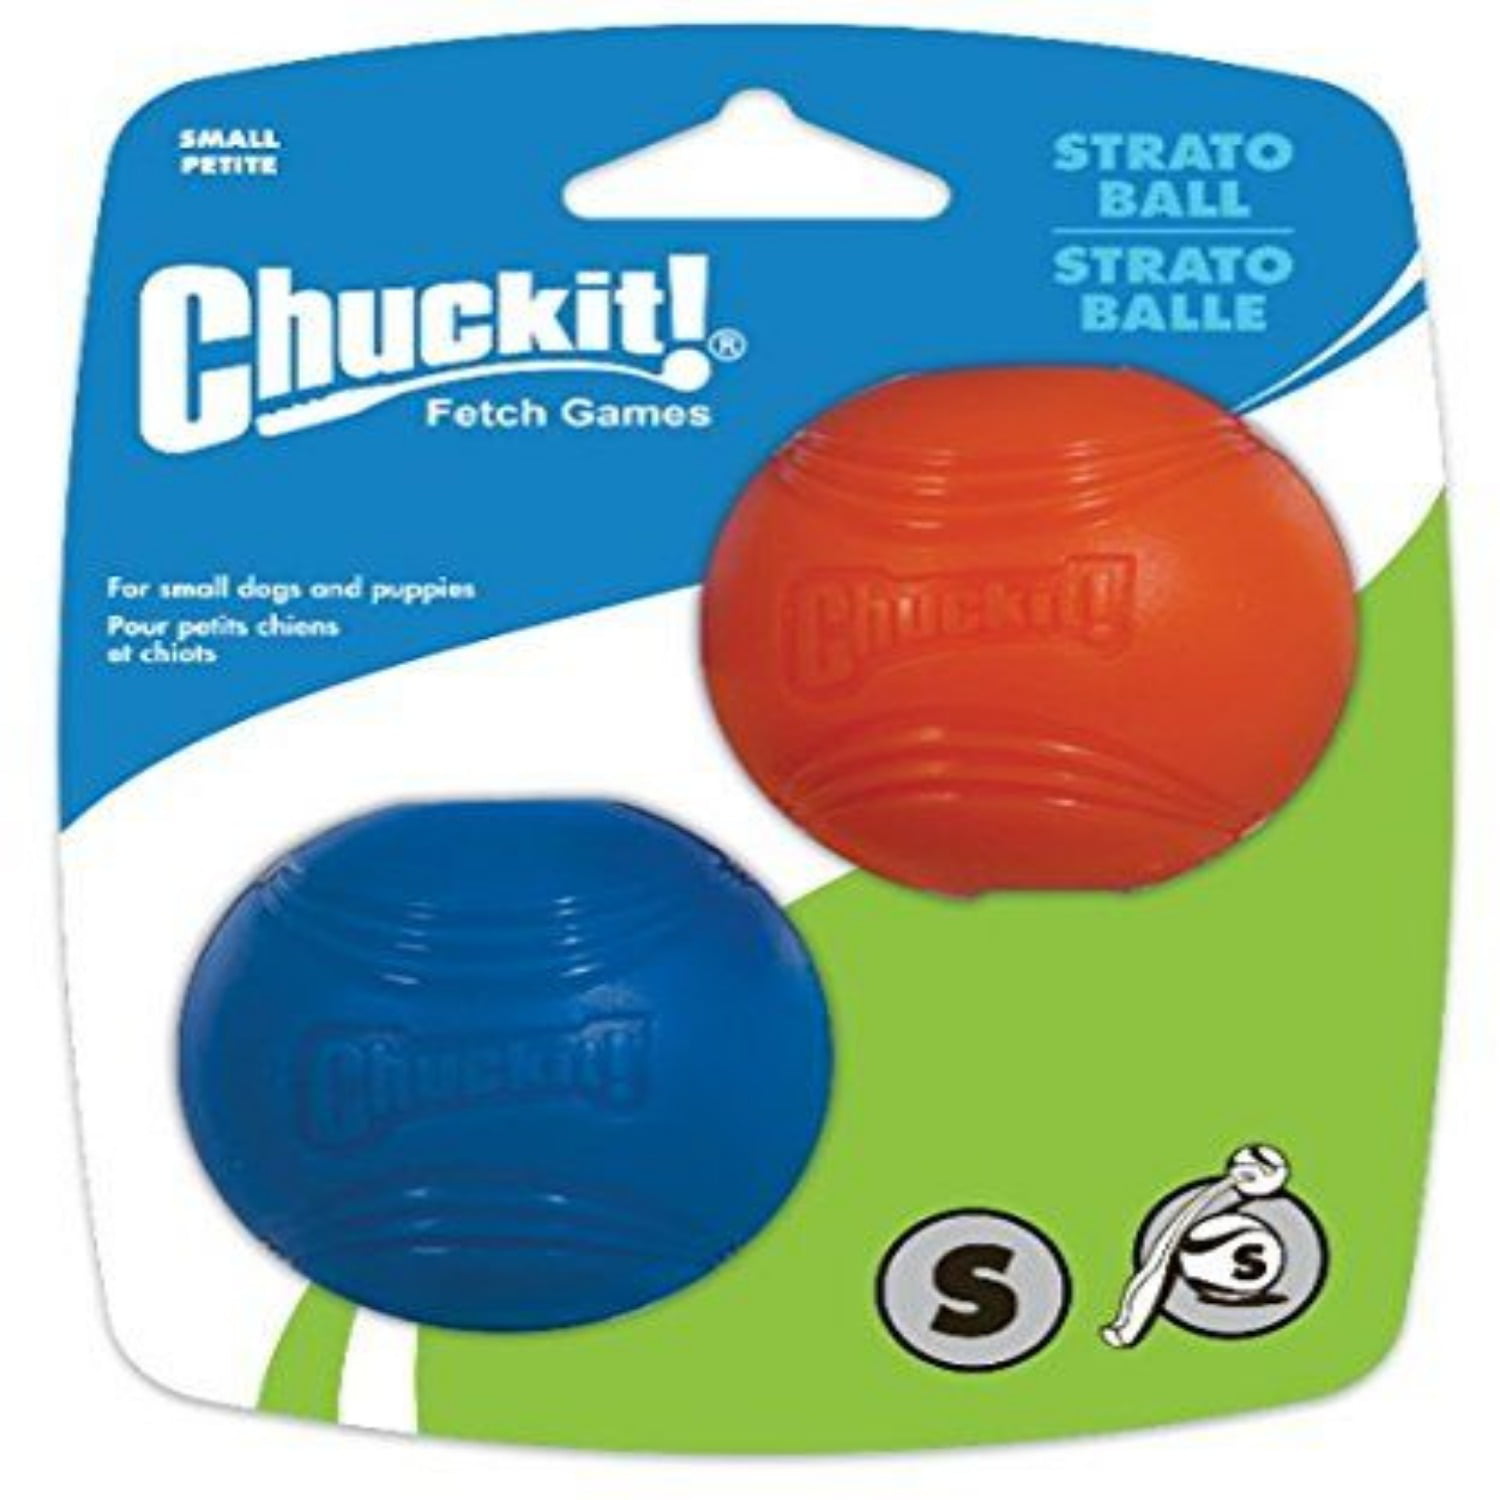 Chuckit! Small Strato Ball for Small Dogs and Puppies - Walmart.com